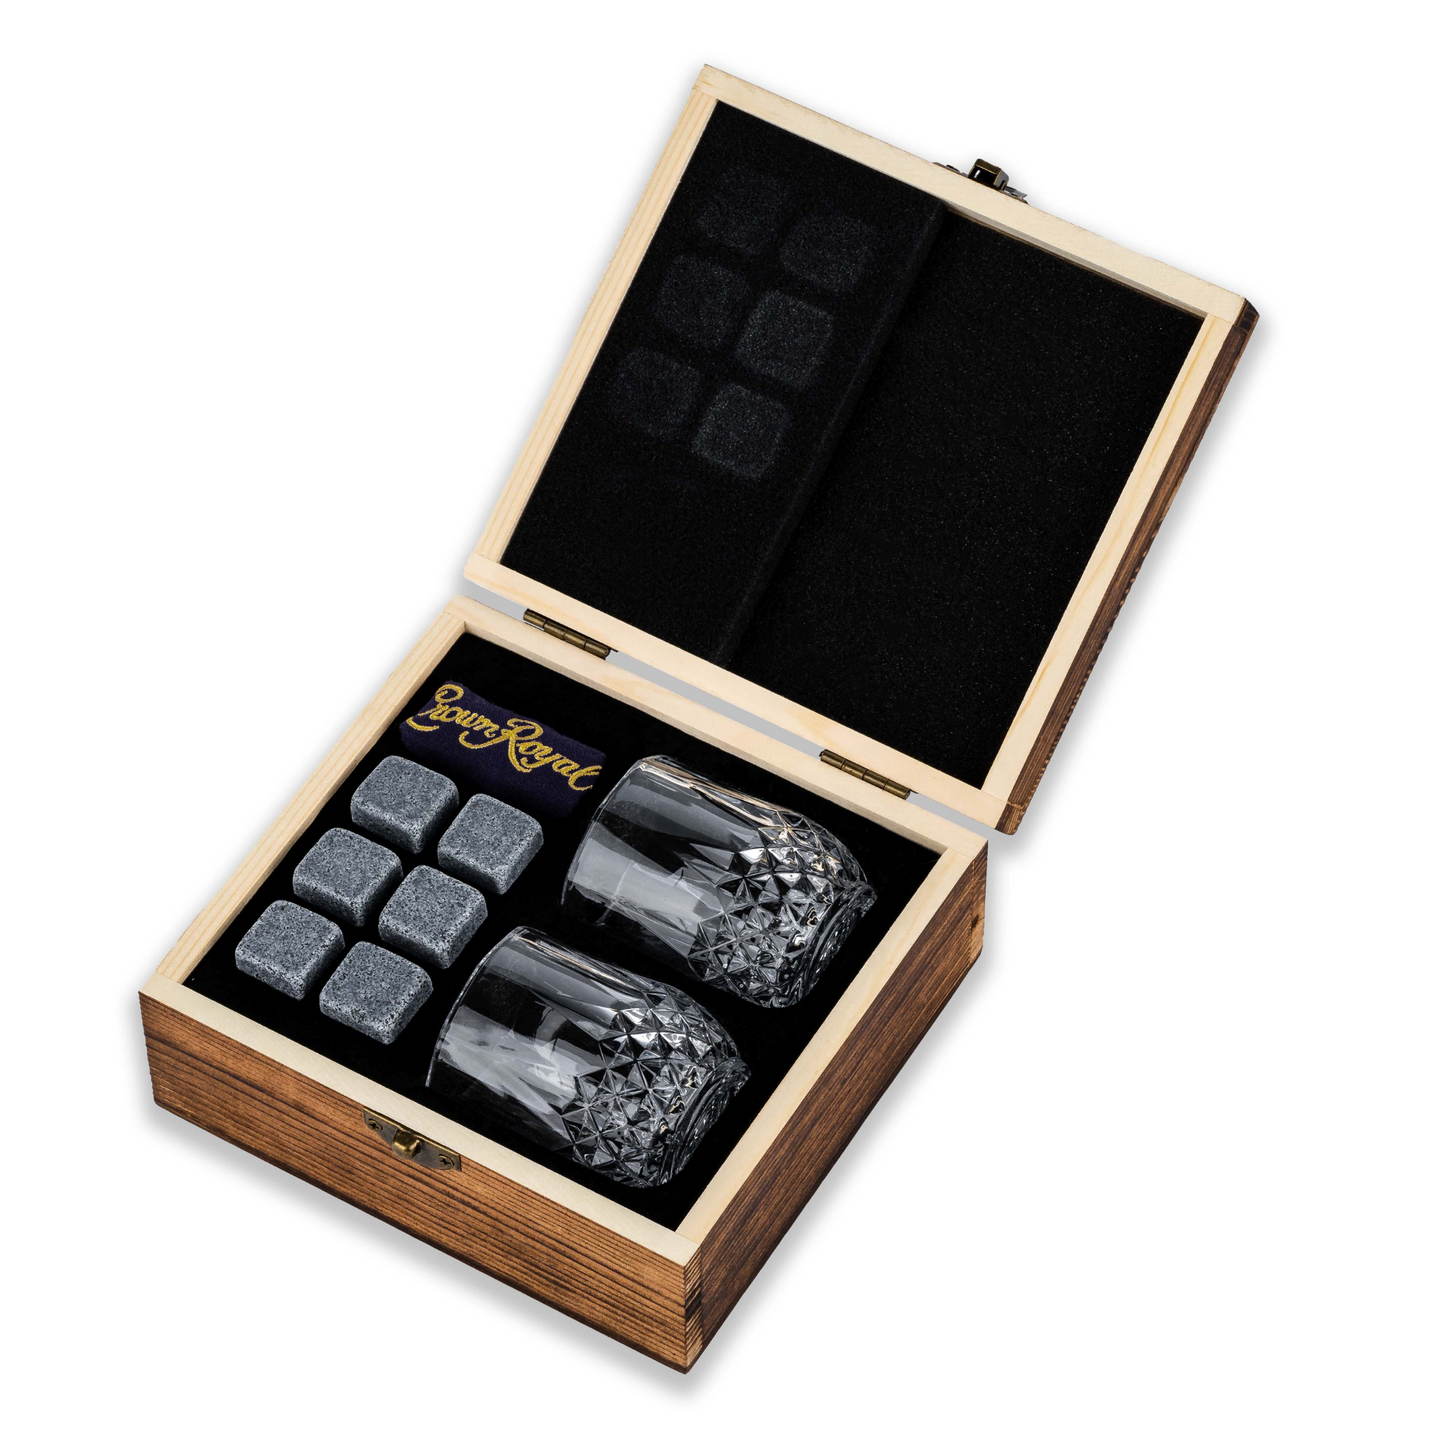 Crown Royal Crystal Whiskey Glass and Stone Set | Wooden Box Set of 2 Crystal Glasses with 6 Whiskey Rocks Chilling Stones | Velvet Crown Royal Pouch Included by Lord’s Rocks Compatible